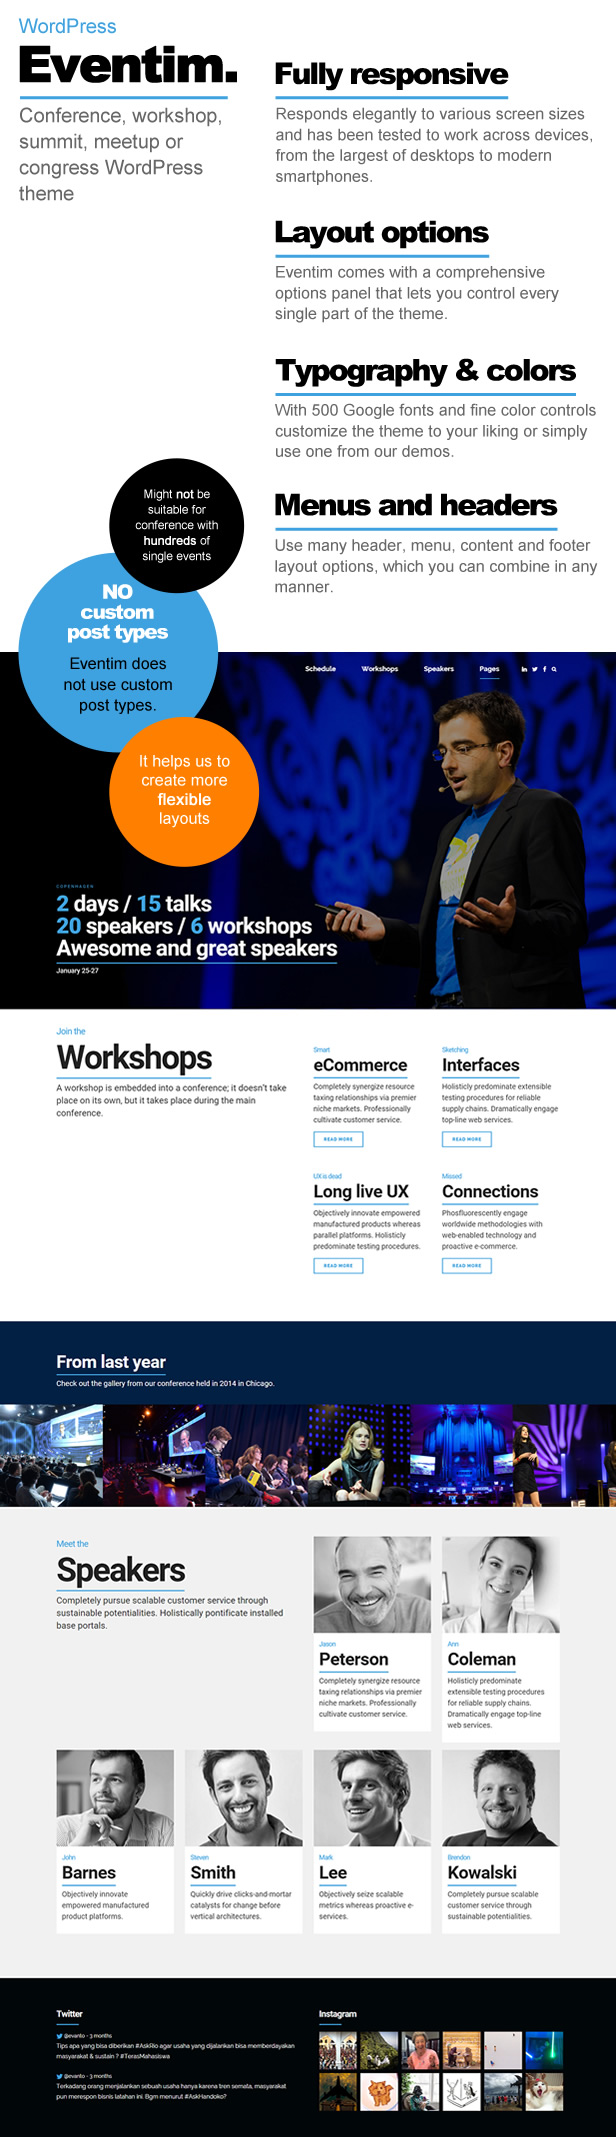 eventim info 001a flat - Eventim - Conference & Events Theme